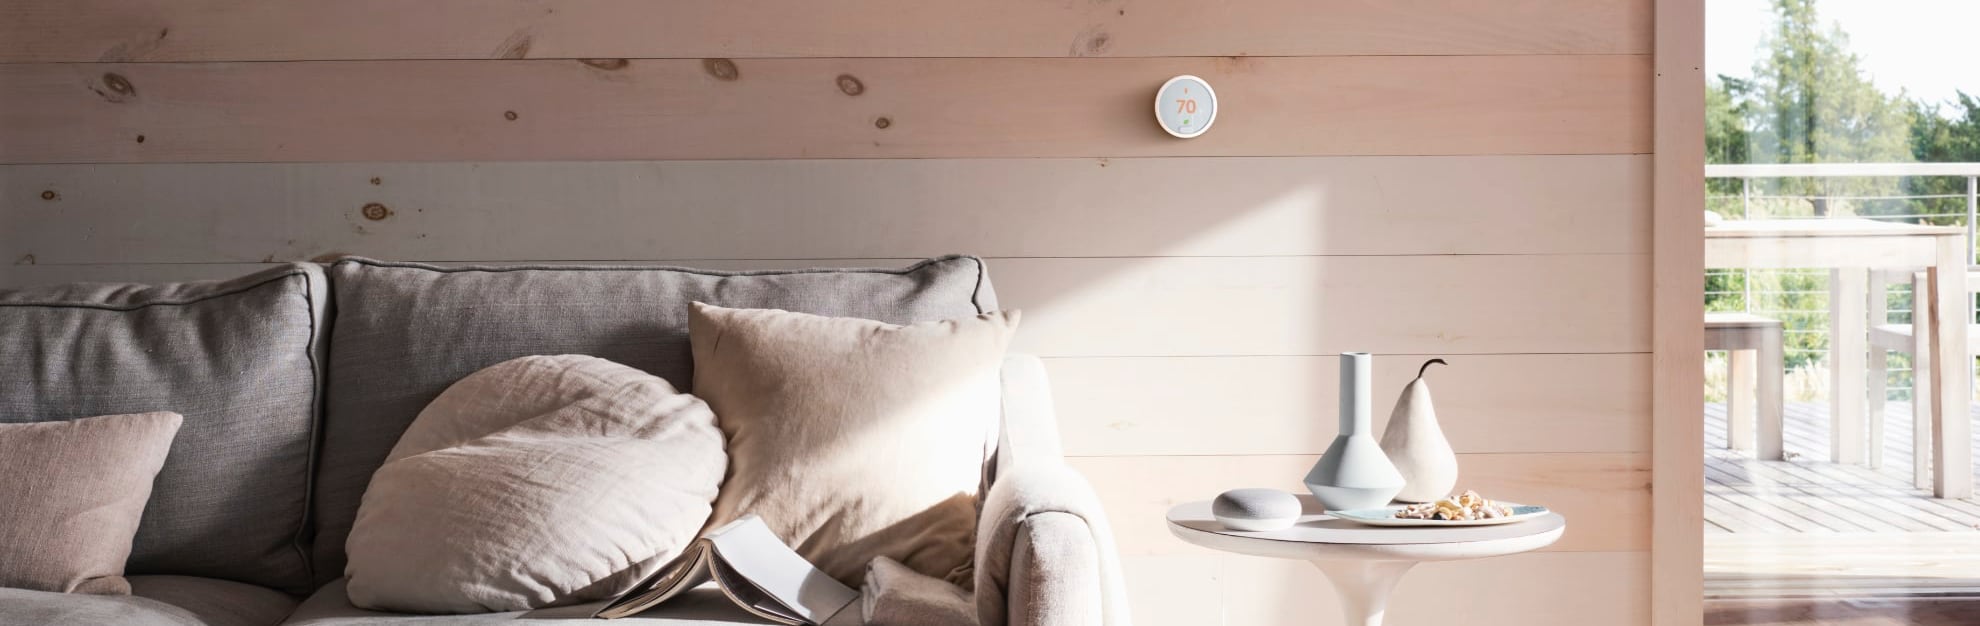 Vivint Home Automation in Yakima